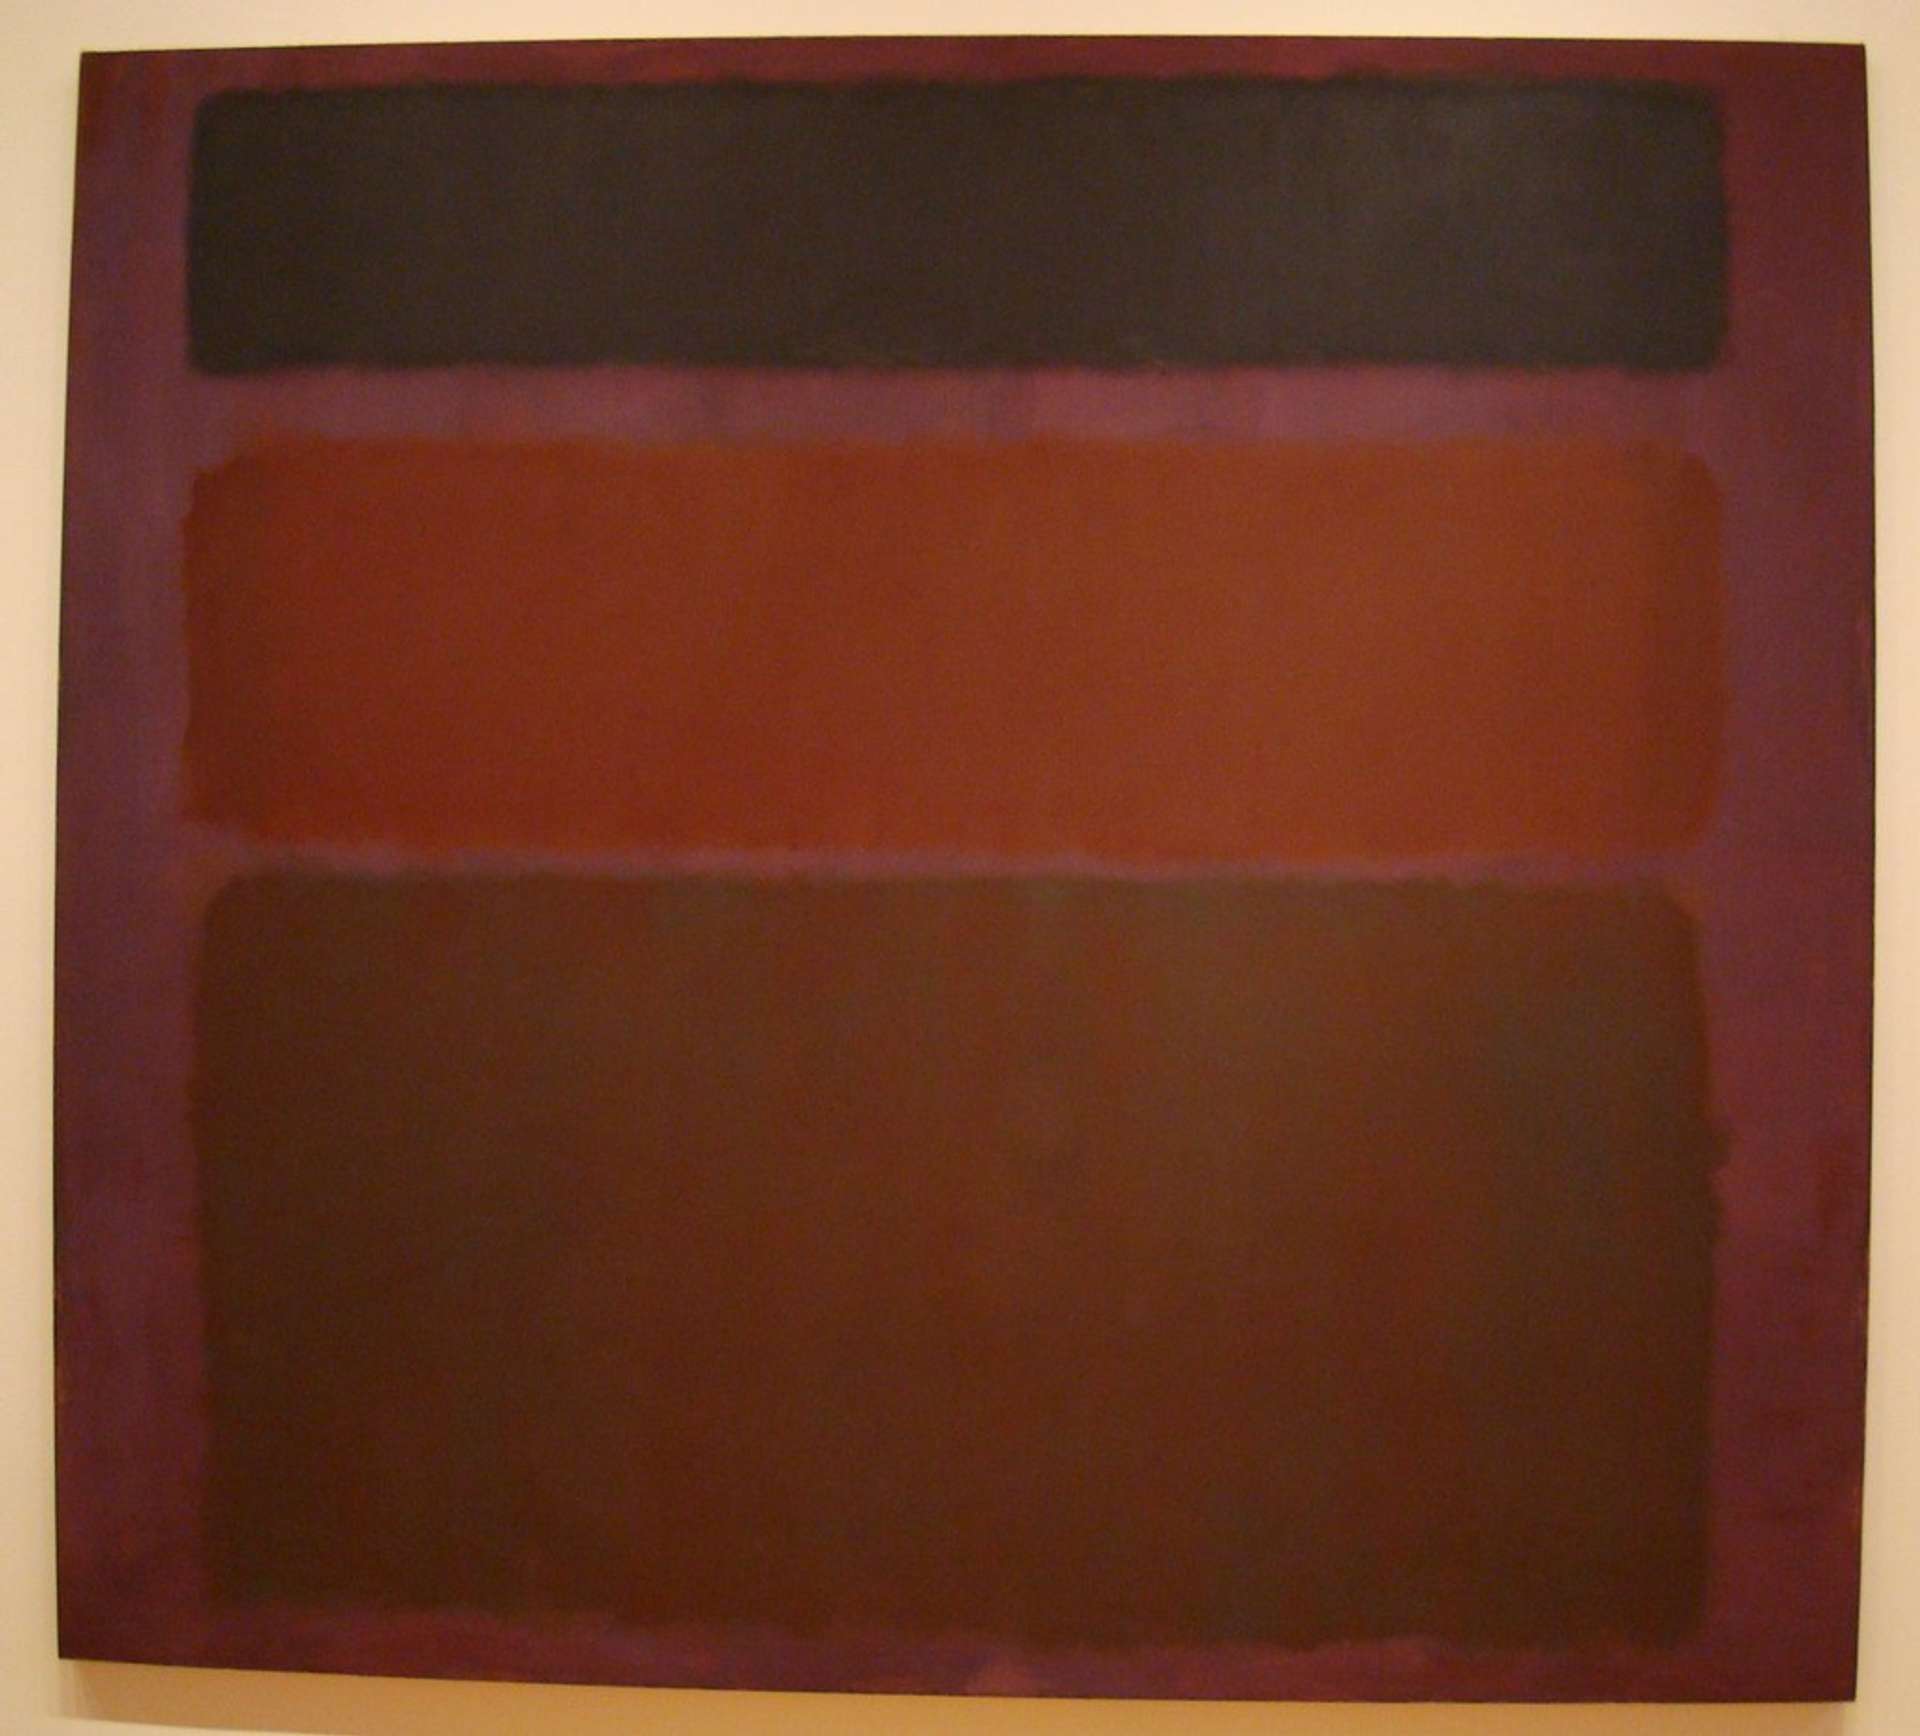 An abstract painting titled "No. 16 (Red, Brown, and Black)" featuring three blocks of colour - red, brown, and black - blending into one another on a large, rectangular canvas.